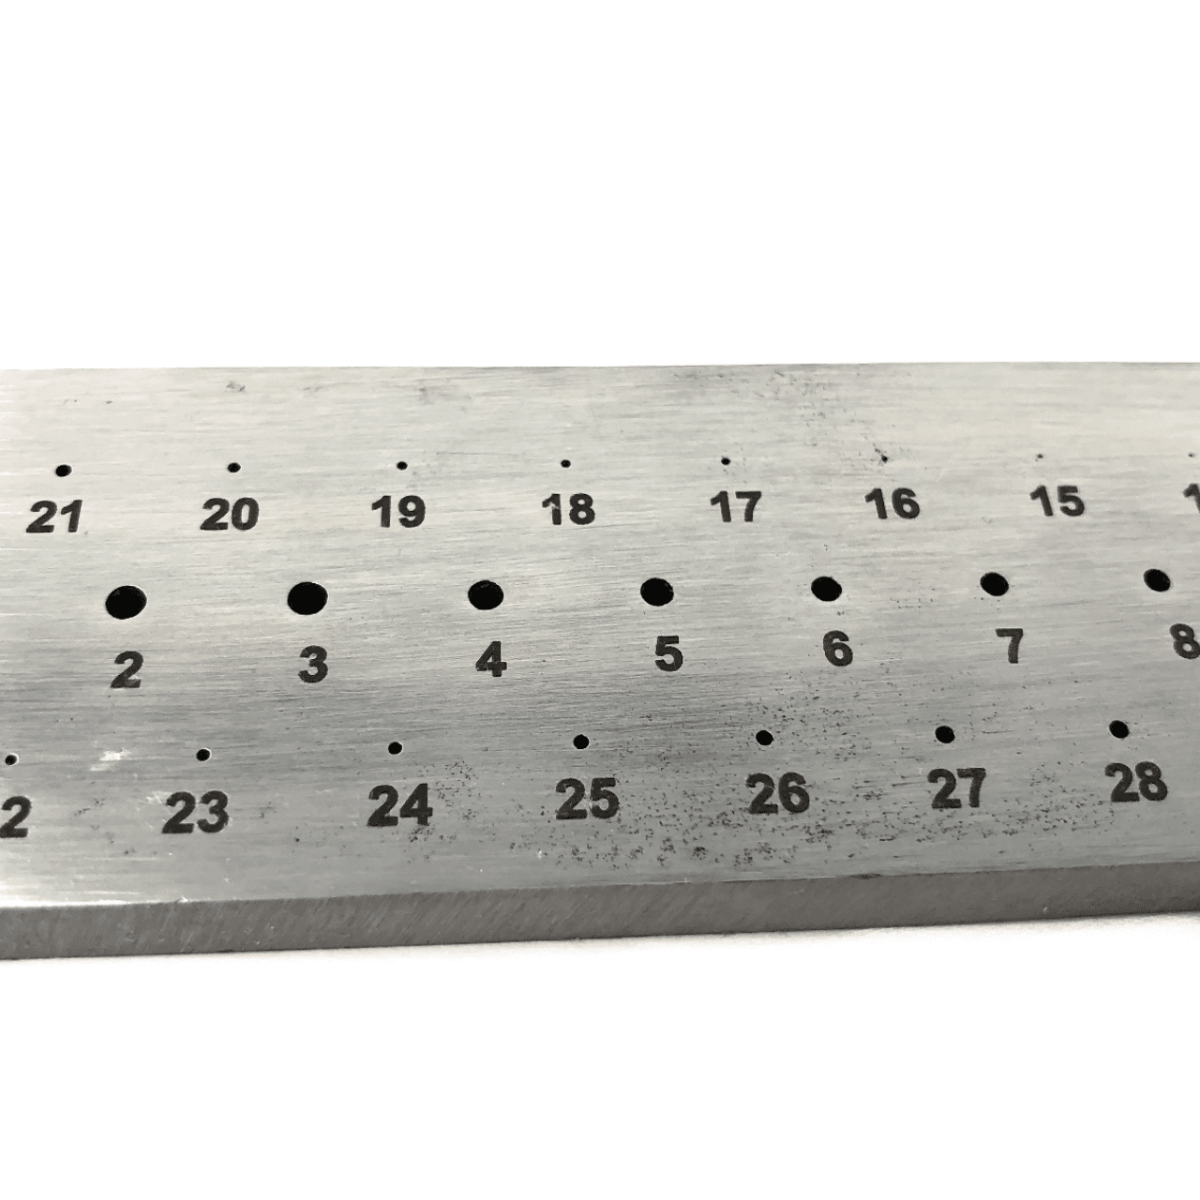 Draw Plate Round Holes 31 Sizes 03mm 2mm Wire Pulling Jewellery Making Tool 194556490166 4 - Maddisons UK